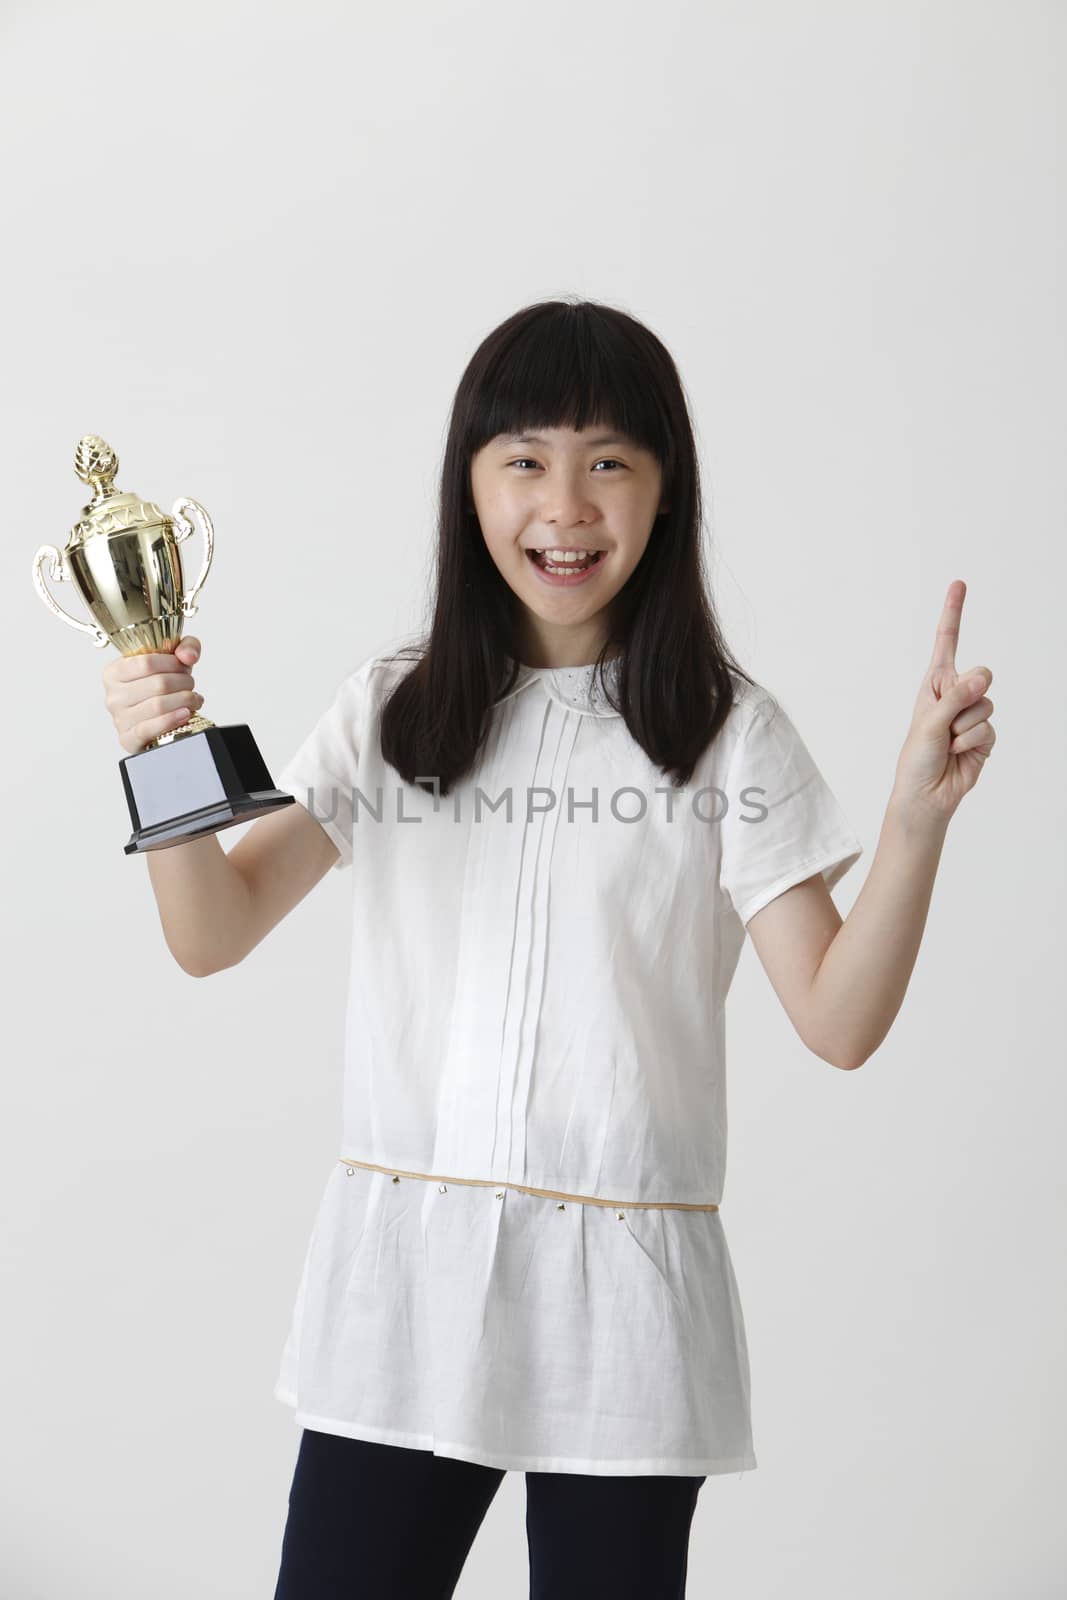 chinese girl holding trophy and with gesture 1